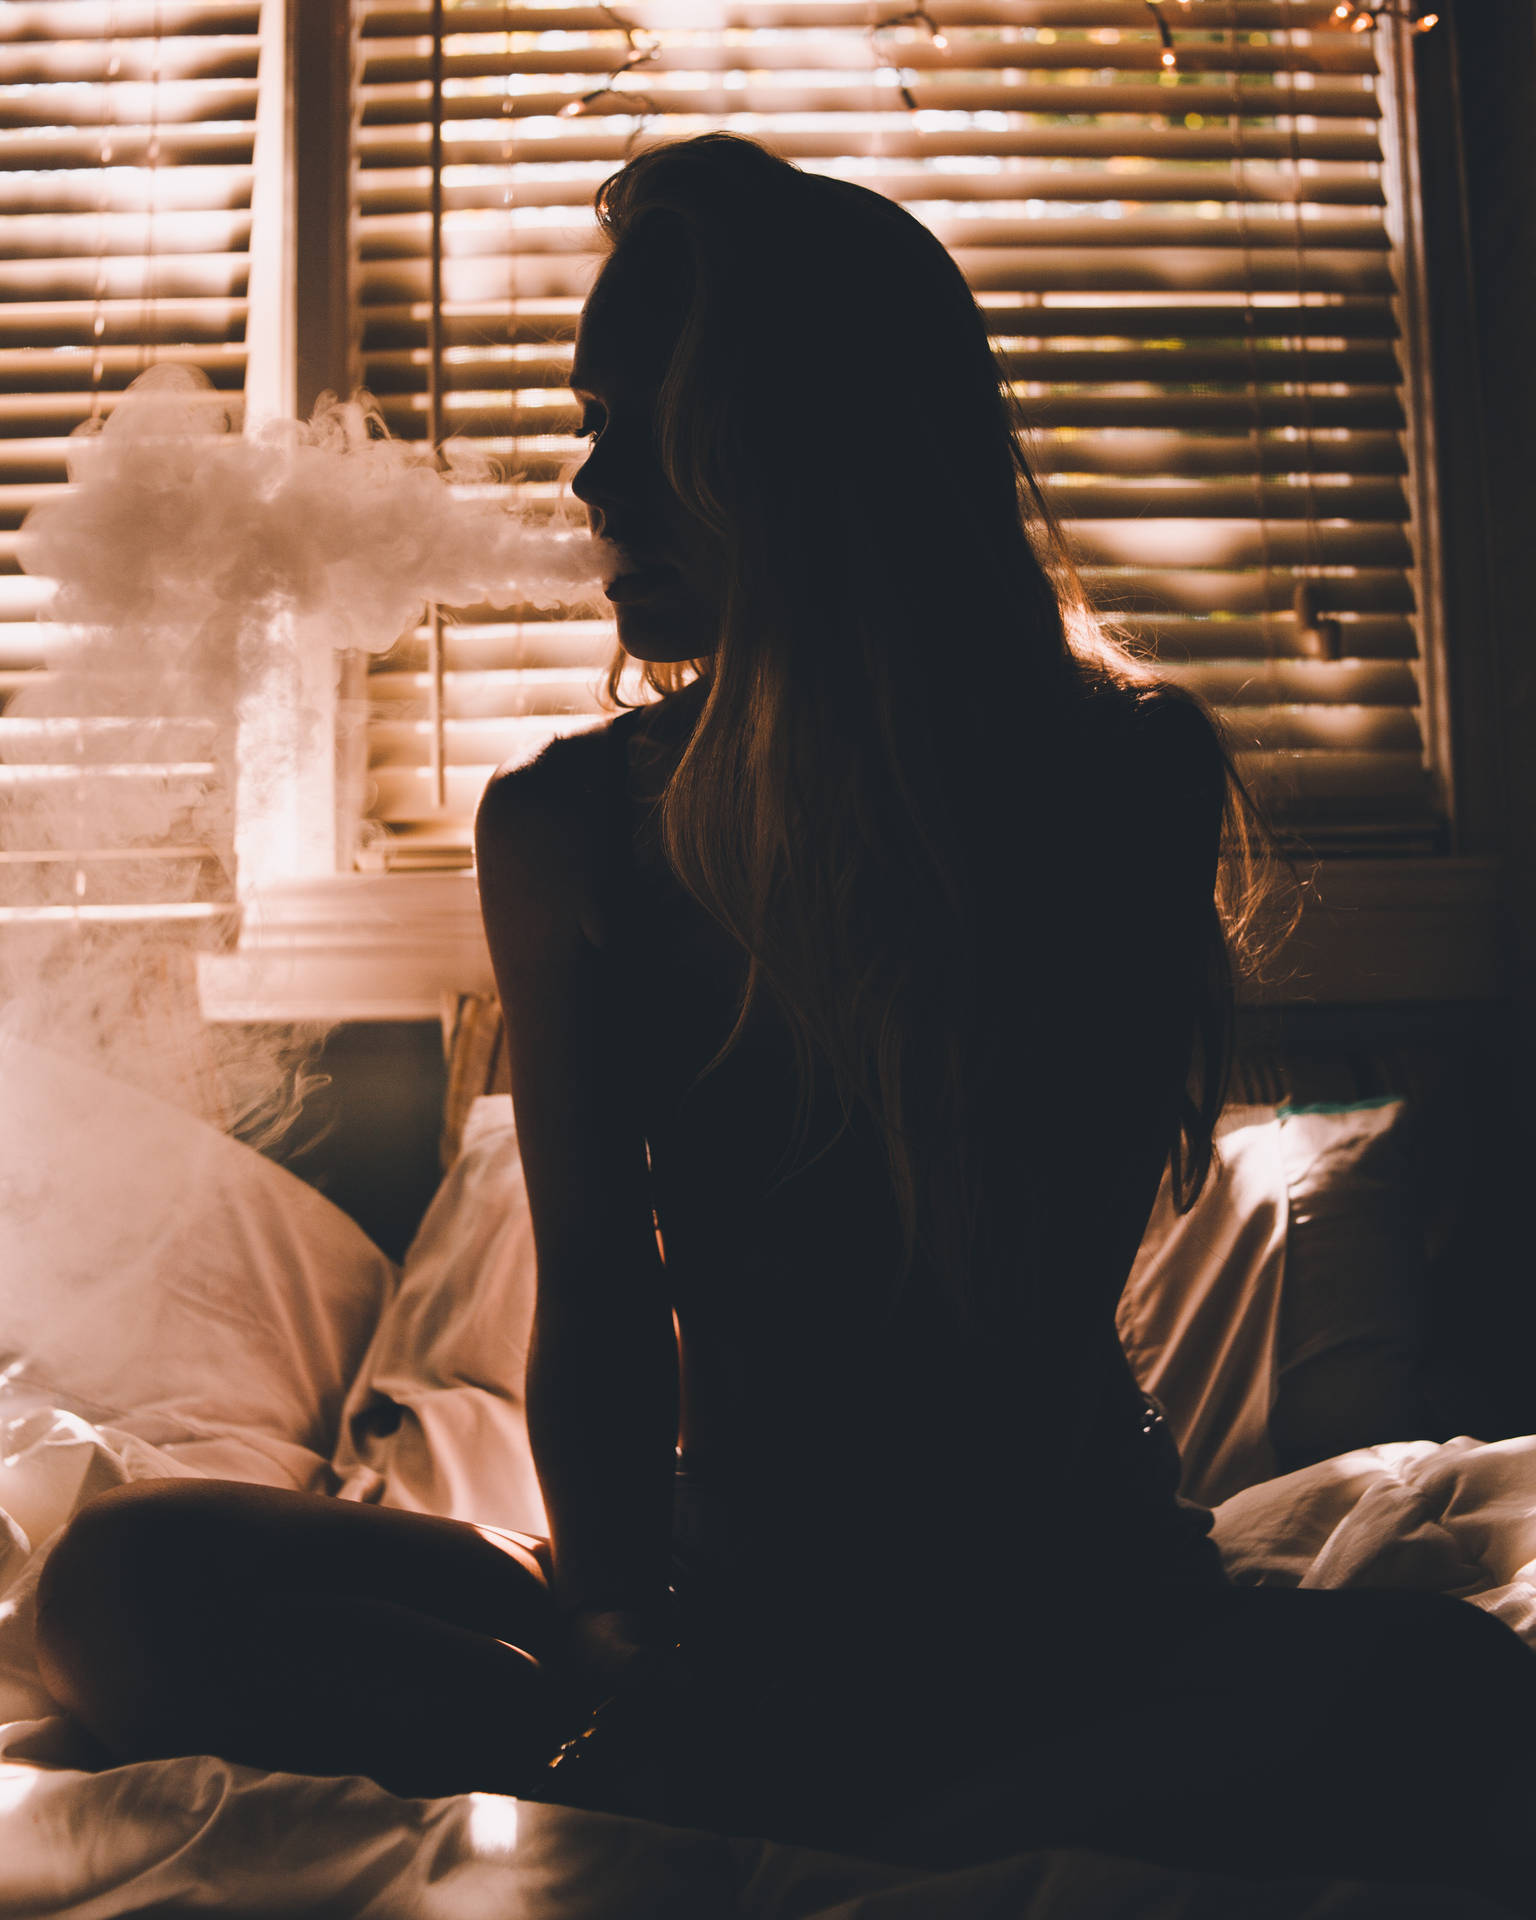 Girl Smoking On Bed Background